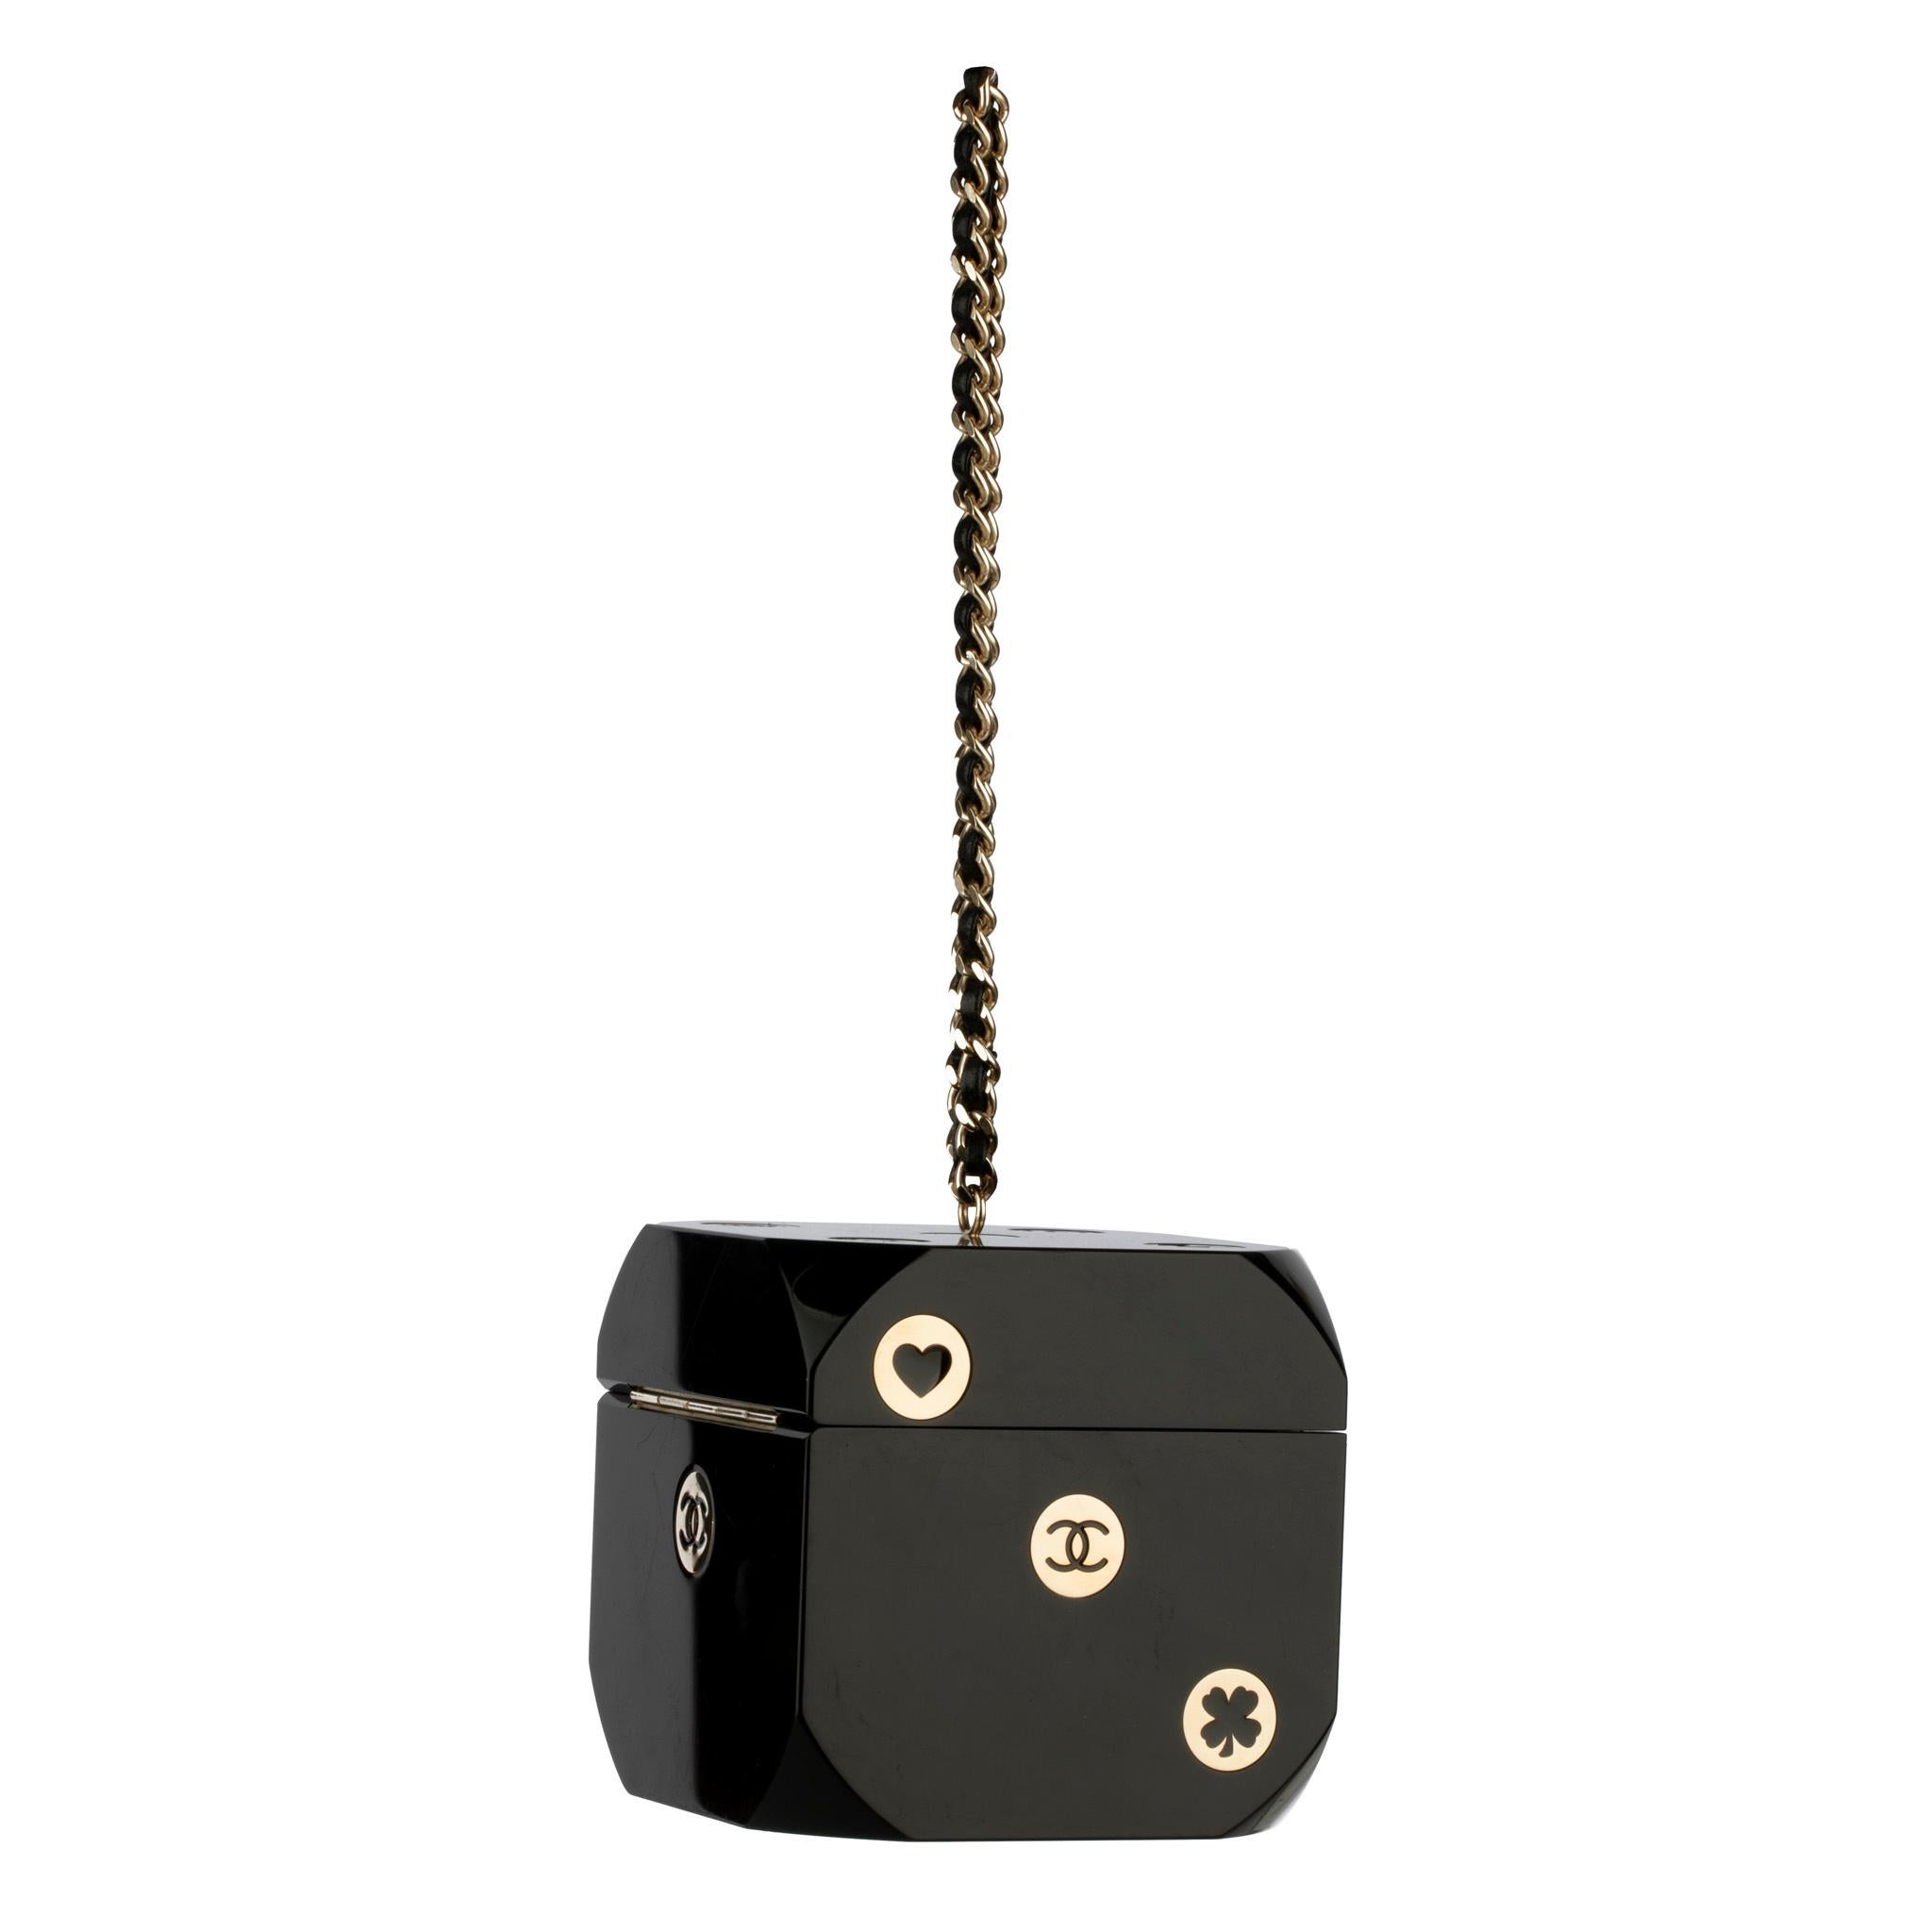 Chanel Minaudière Limited Edition Casino Dice Black Gold-Tone Hardware In Excellent Condition For Sale In Sydney, New South Wales